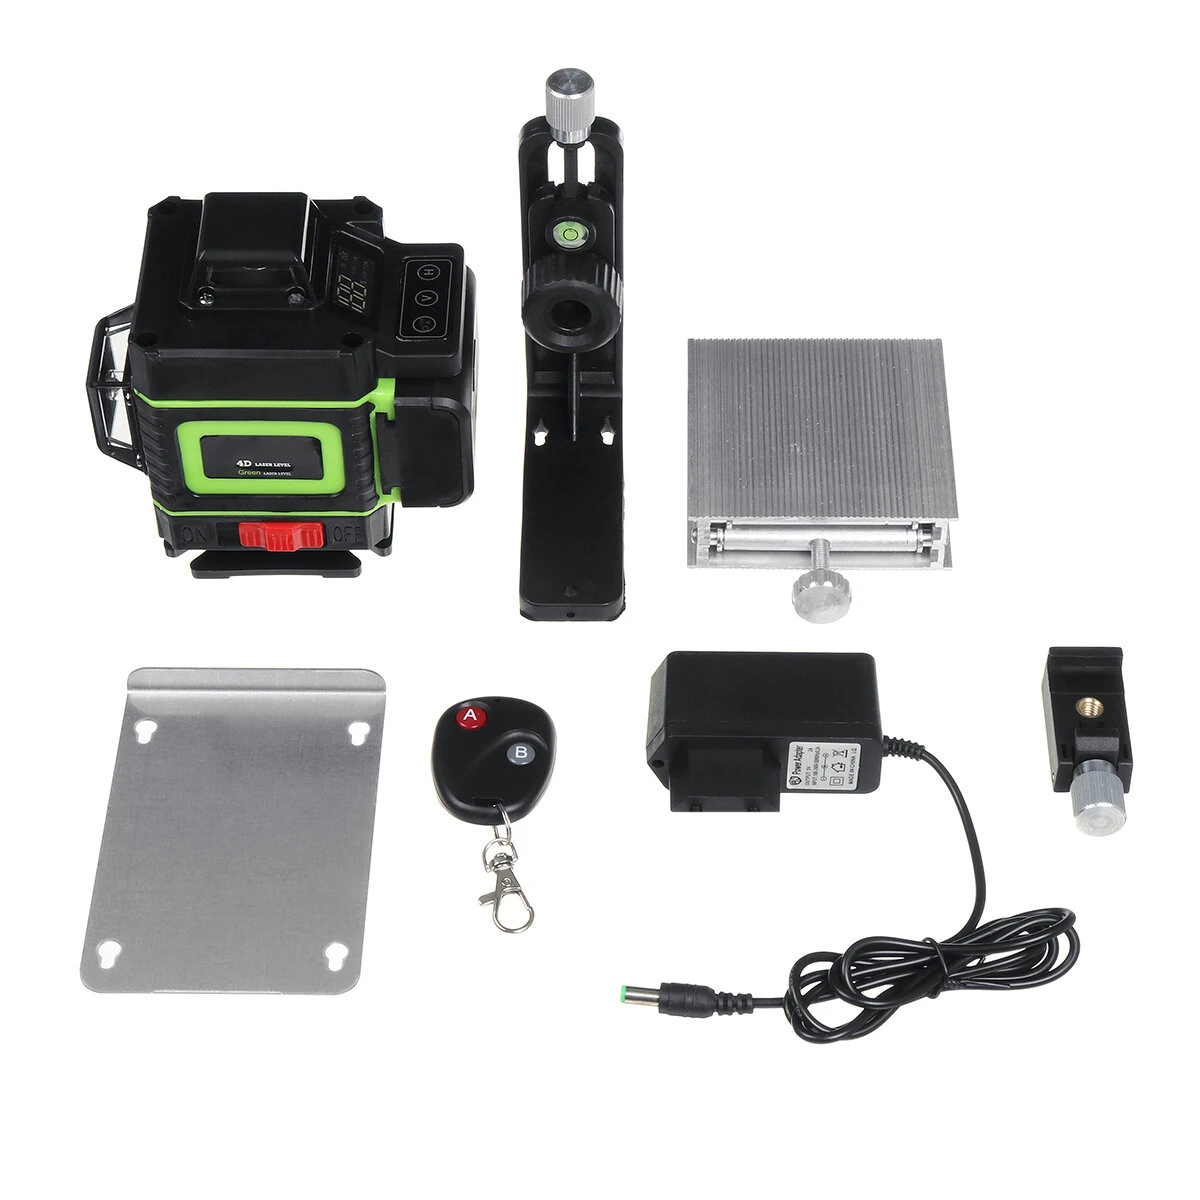 16-Line-Strong-Green-Light-3D-Remote-Control-Laser-Level-Measure-with-Wall-Attachment-Frame-1853062-12